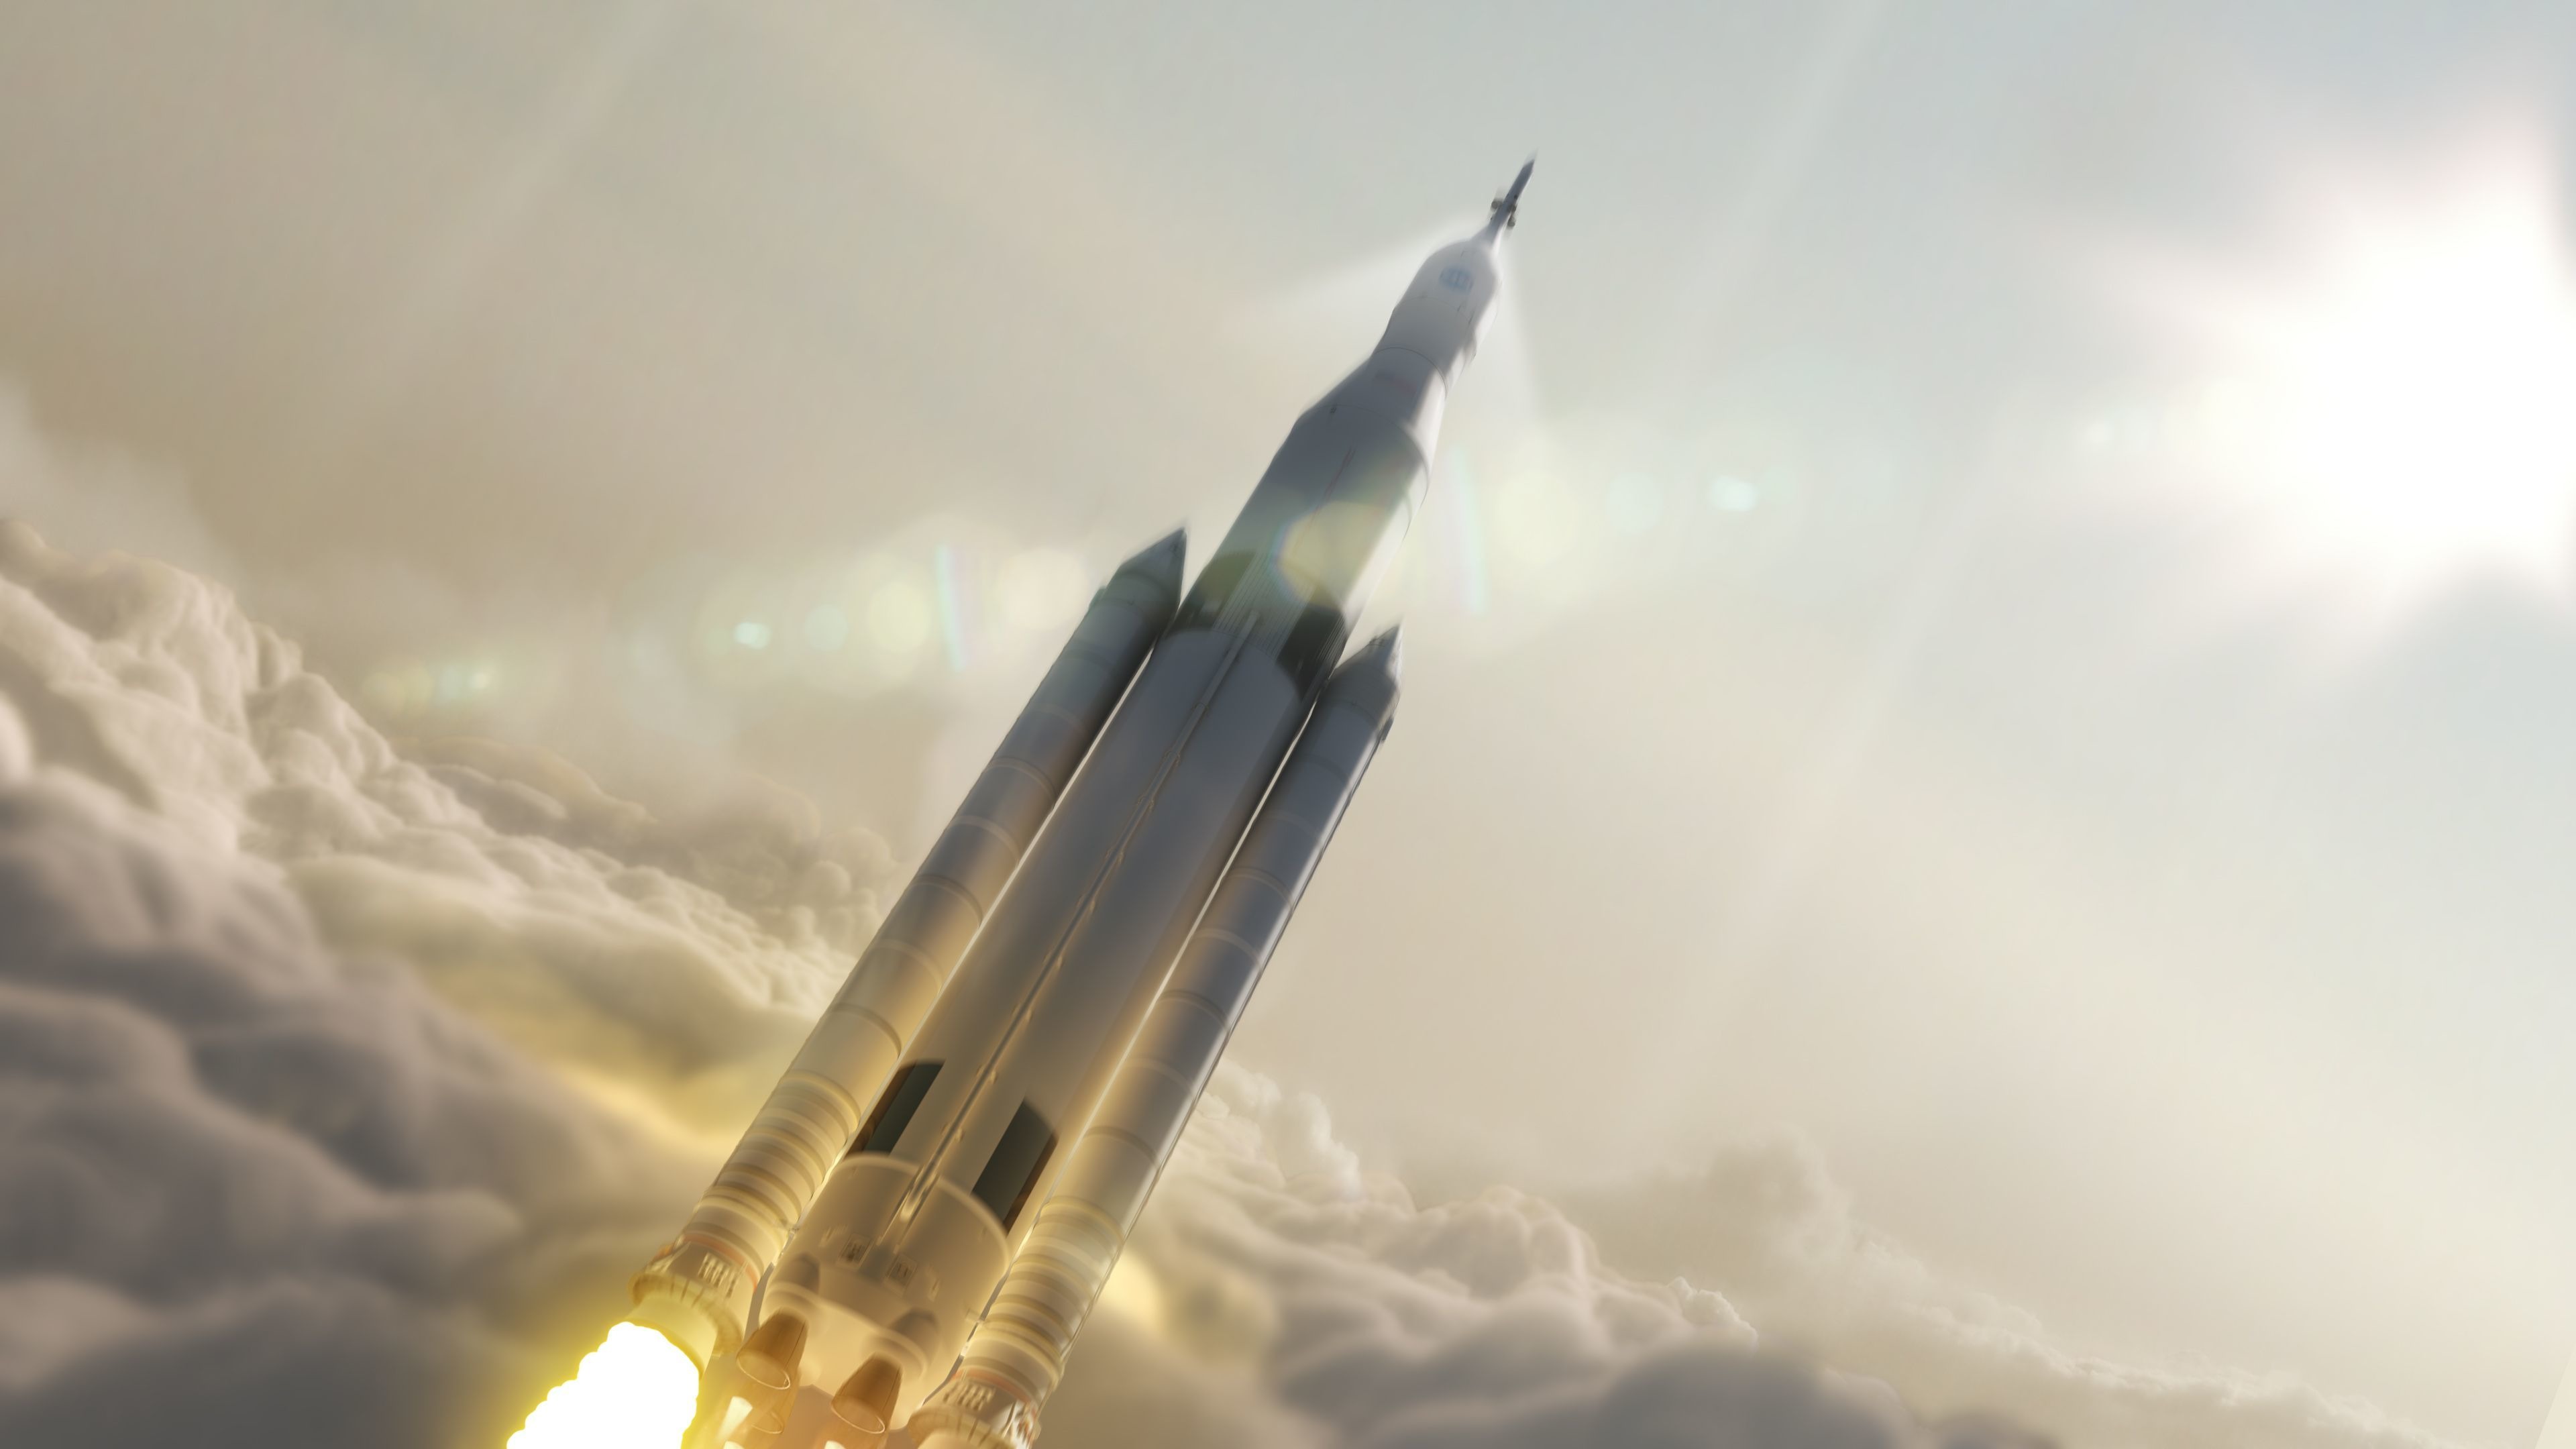 Download 3840x2160 wallpaper falcon heavy, sky, clouds, rocket, spacex, 4k, uhd 16: widescreen, 3840x2160 HD image, background, 2964